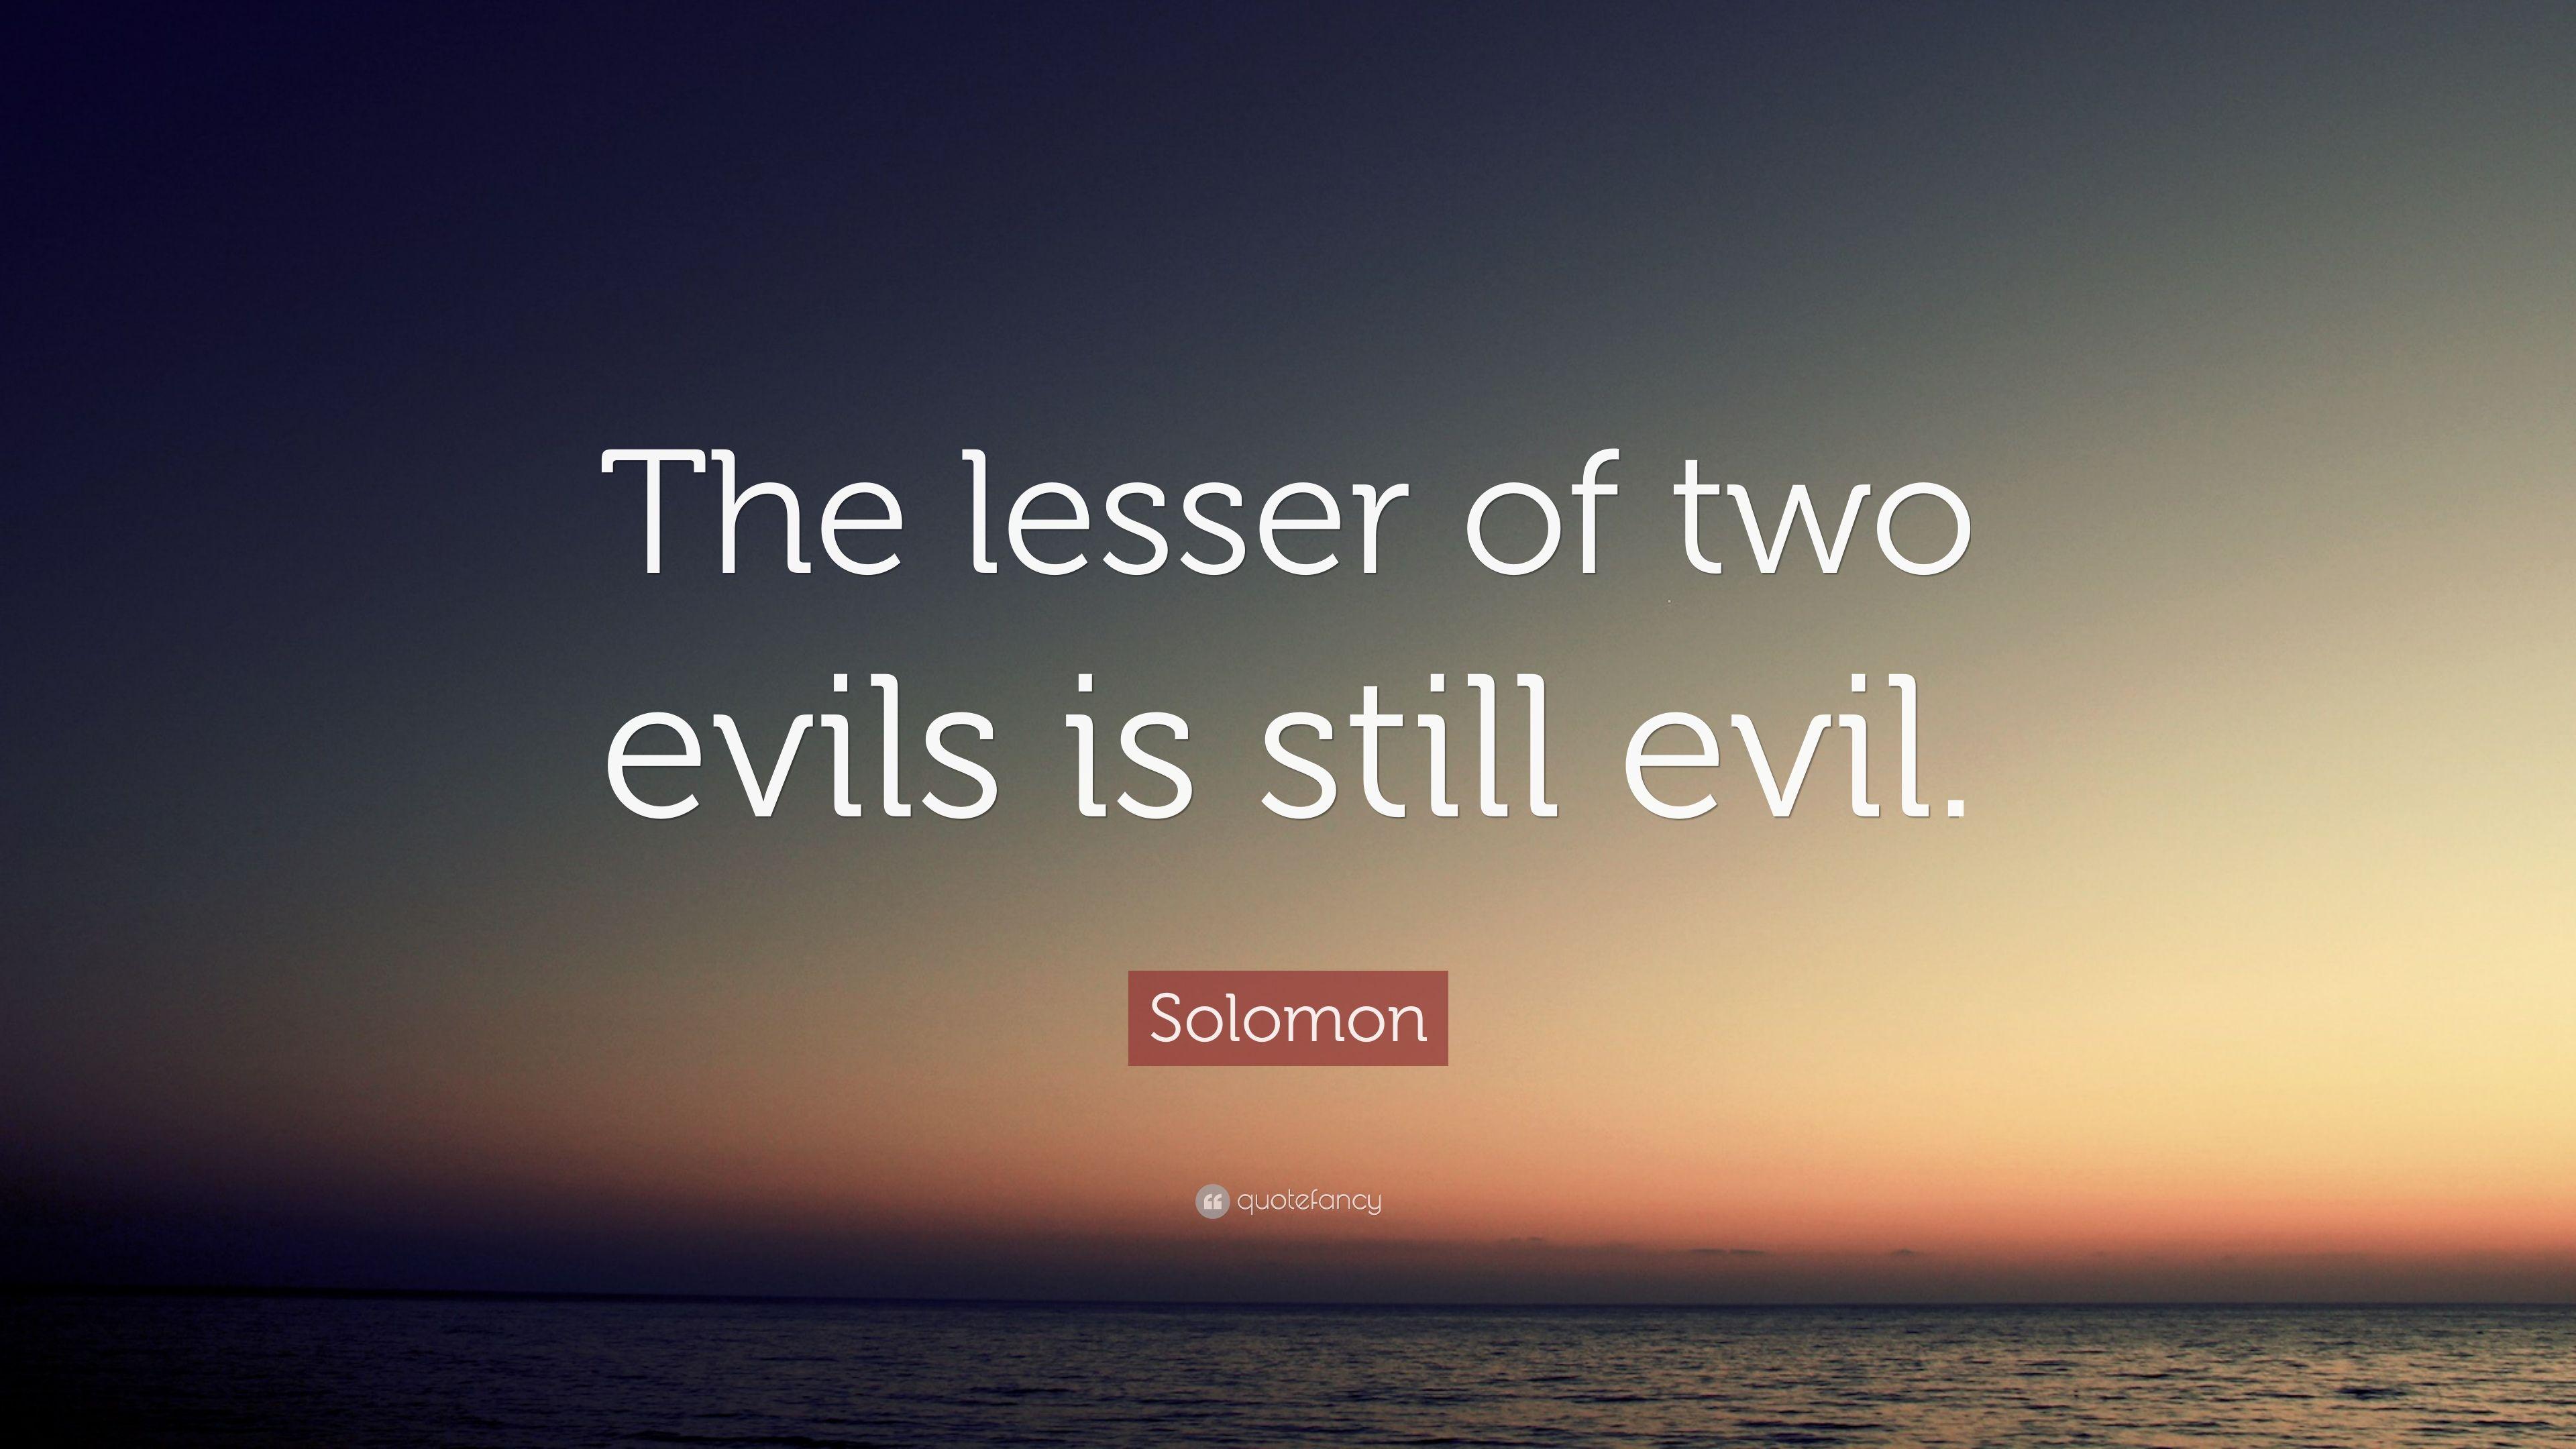 Solomon Quote: “The lesser of two evils is still evil.” 10